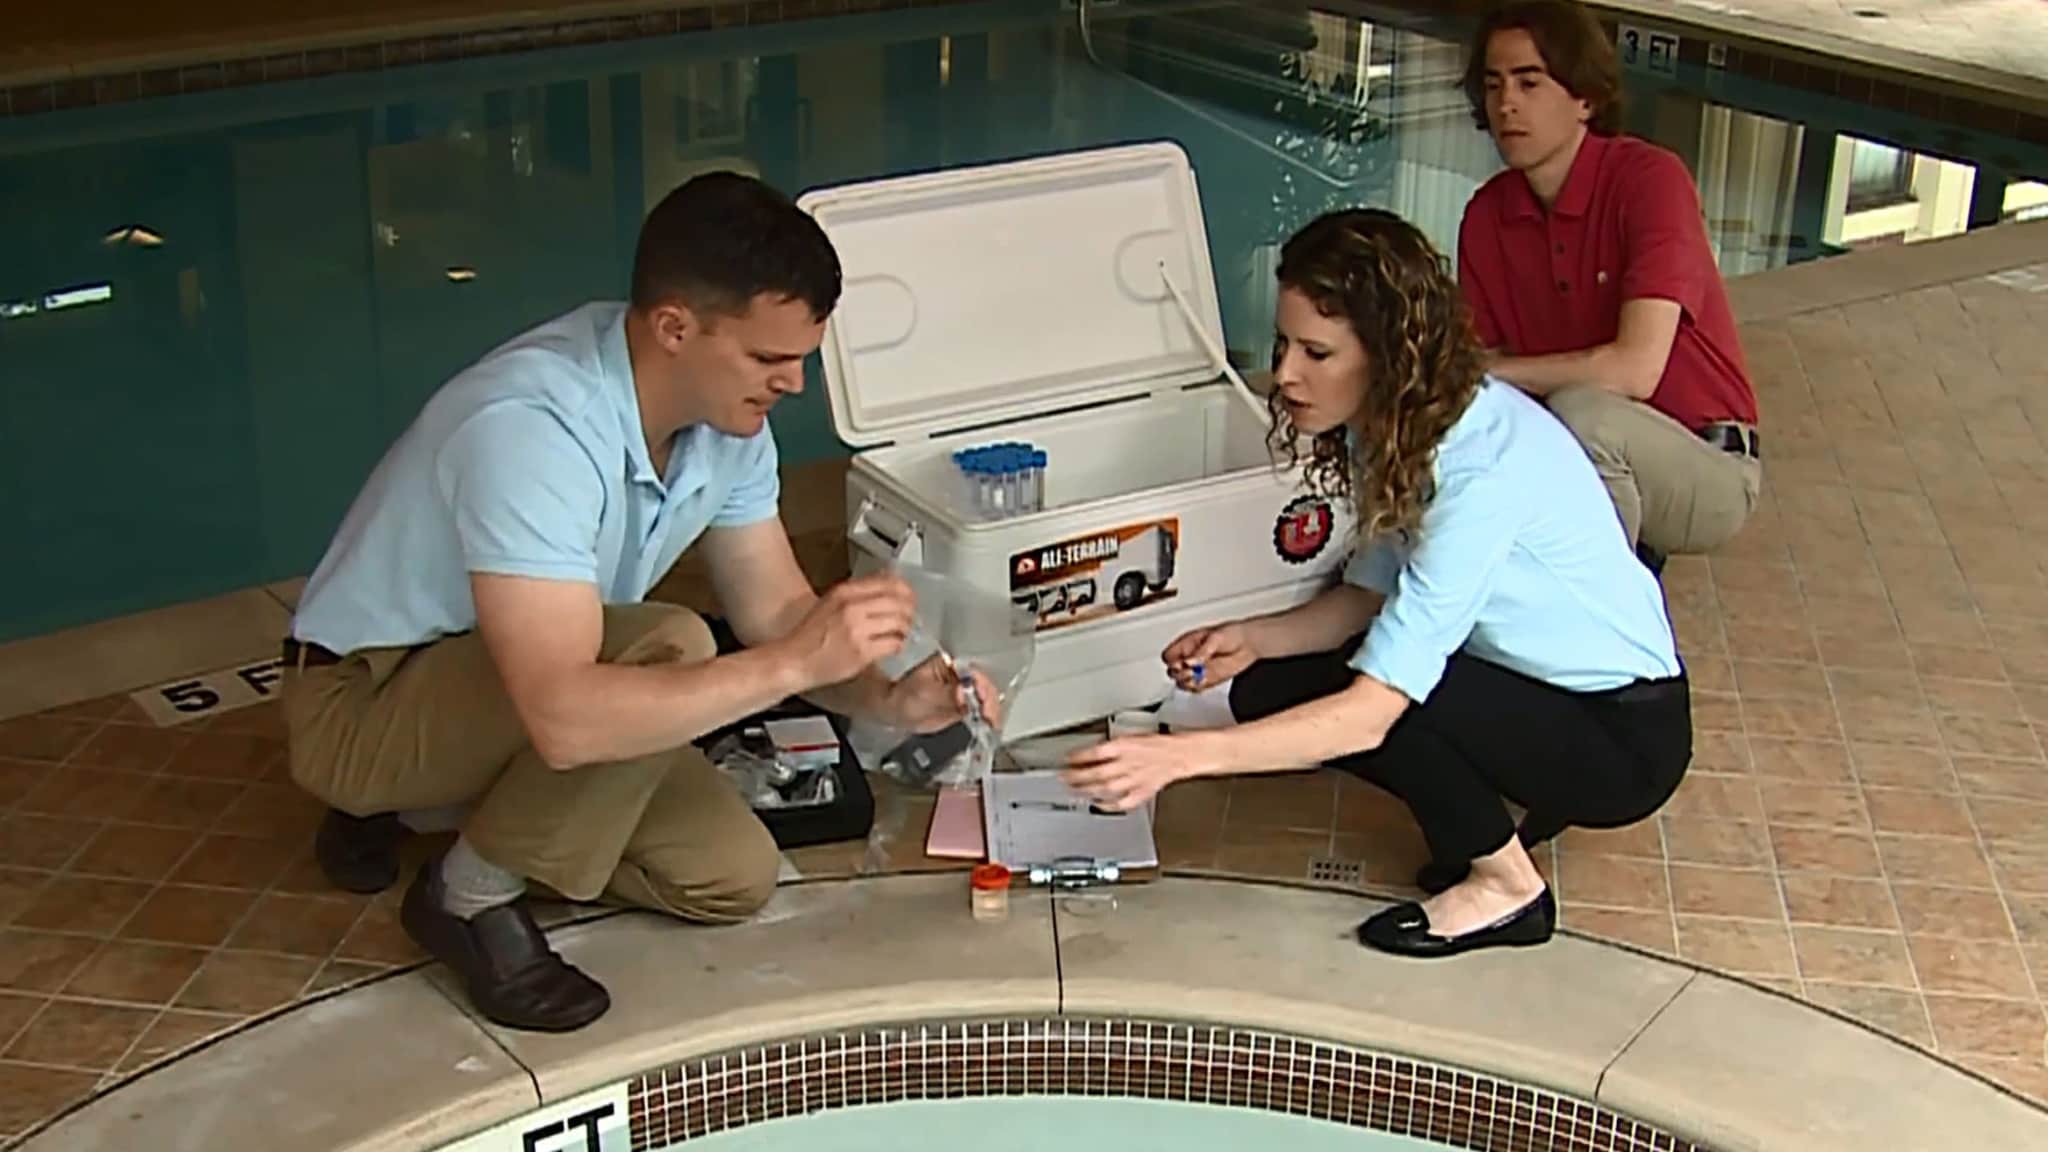 People taking water samples next to a hot tub.